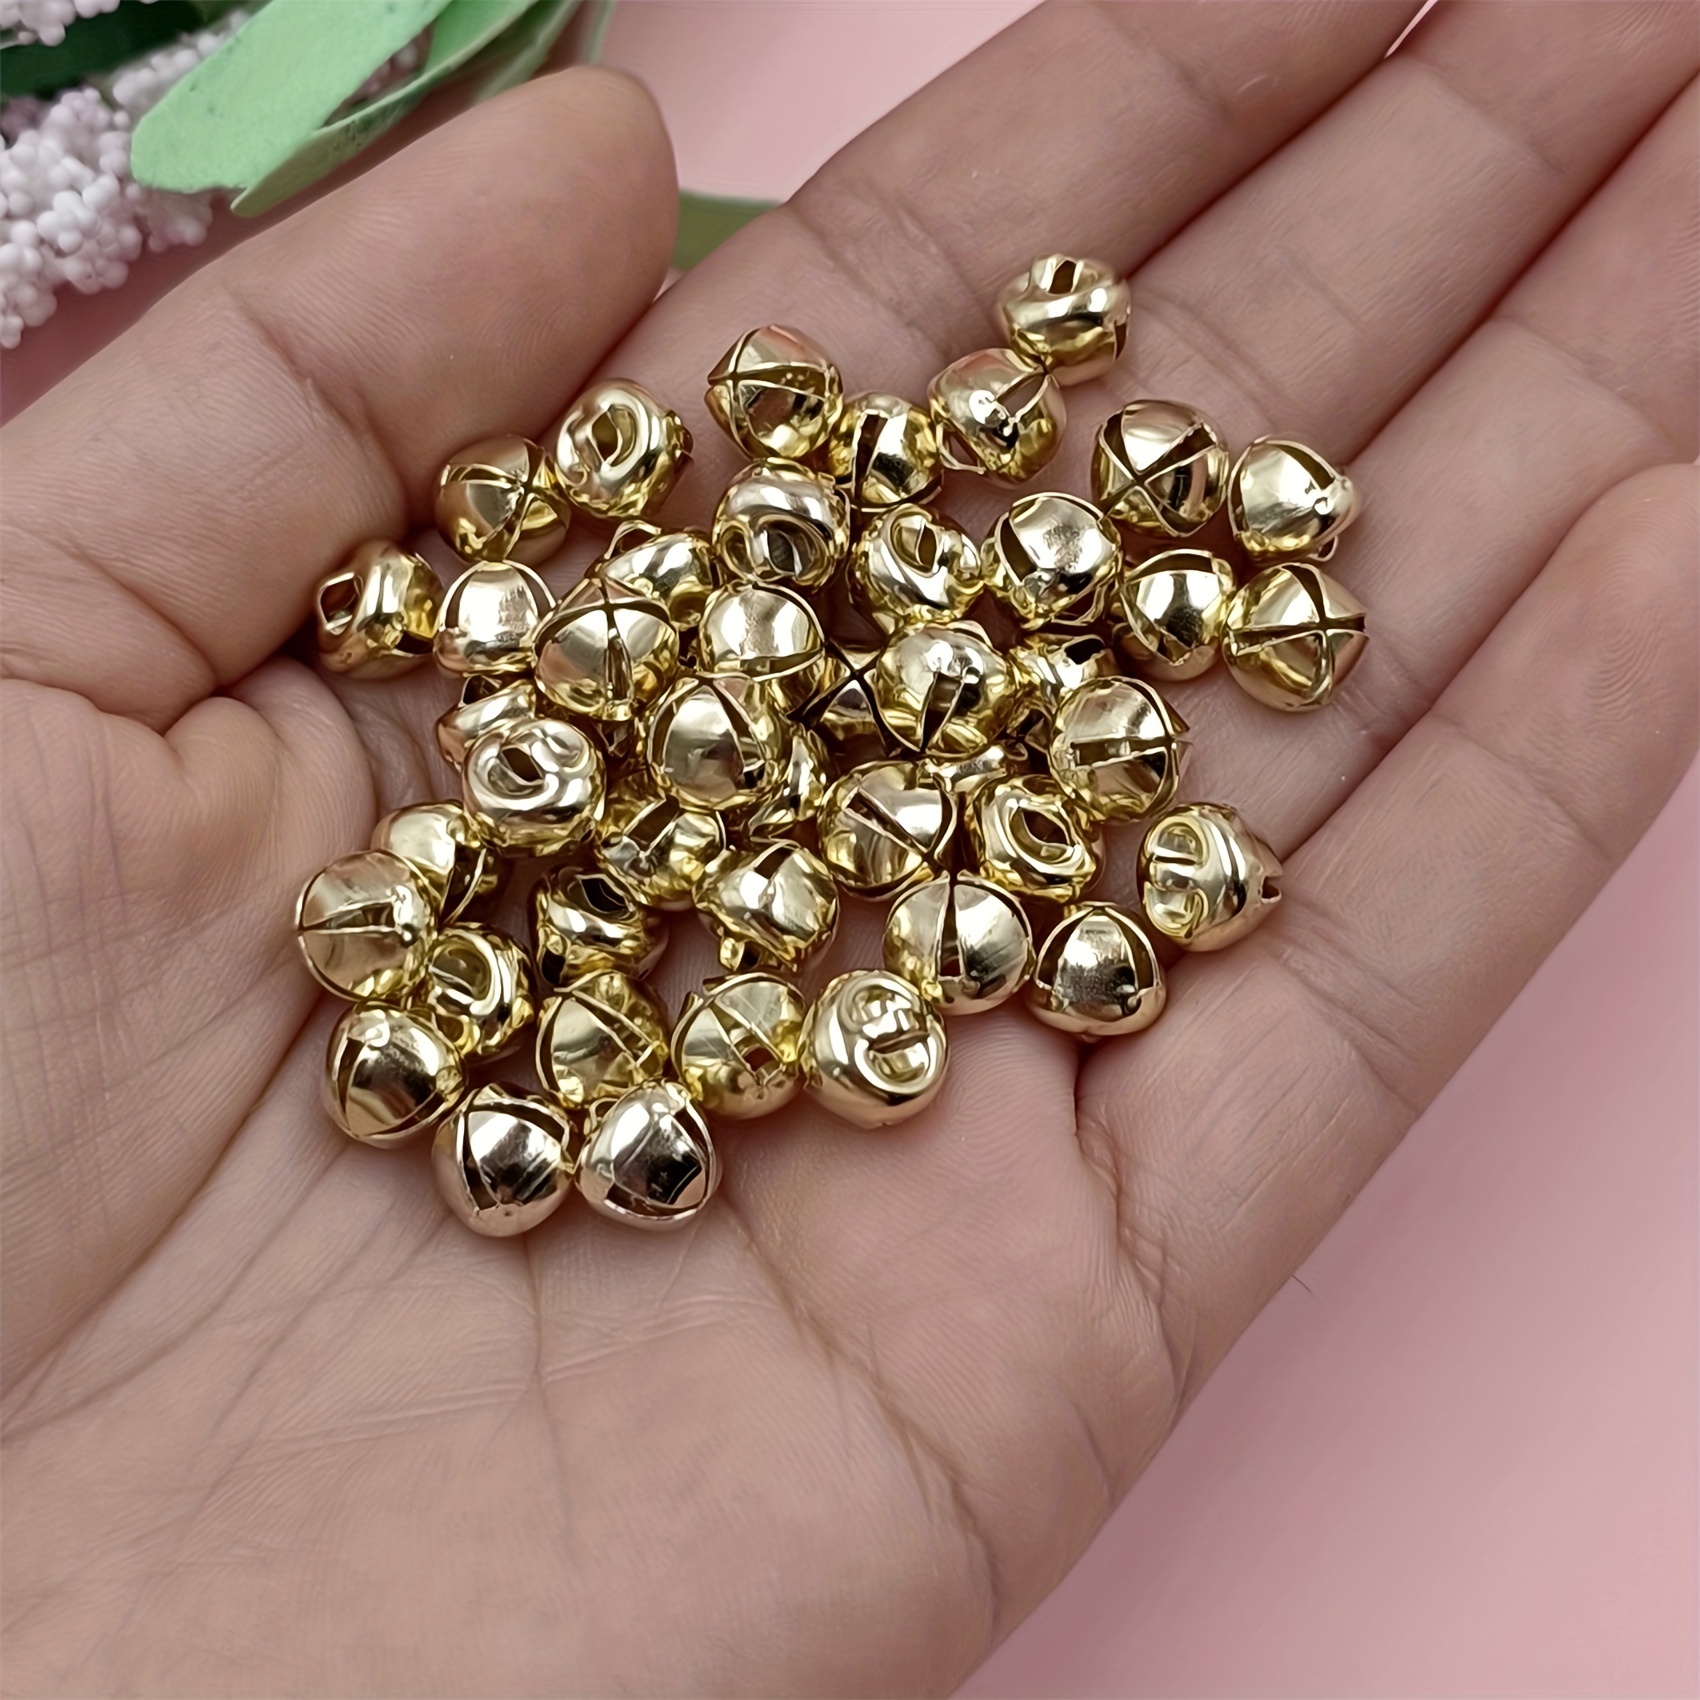 10pcs Mini Bells, Vintage Bronze Small Bells, Alloy Small Bells For DIY  Bracelets, Anklets, Necklace Weaving/jewelry Making, Christmas Decorations